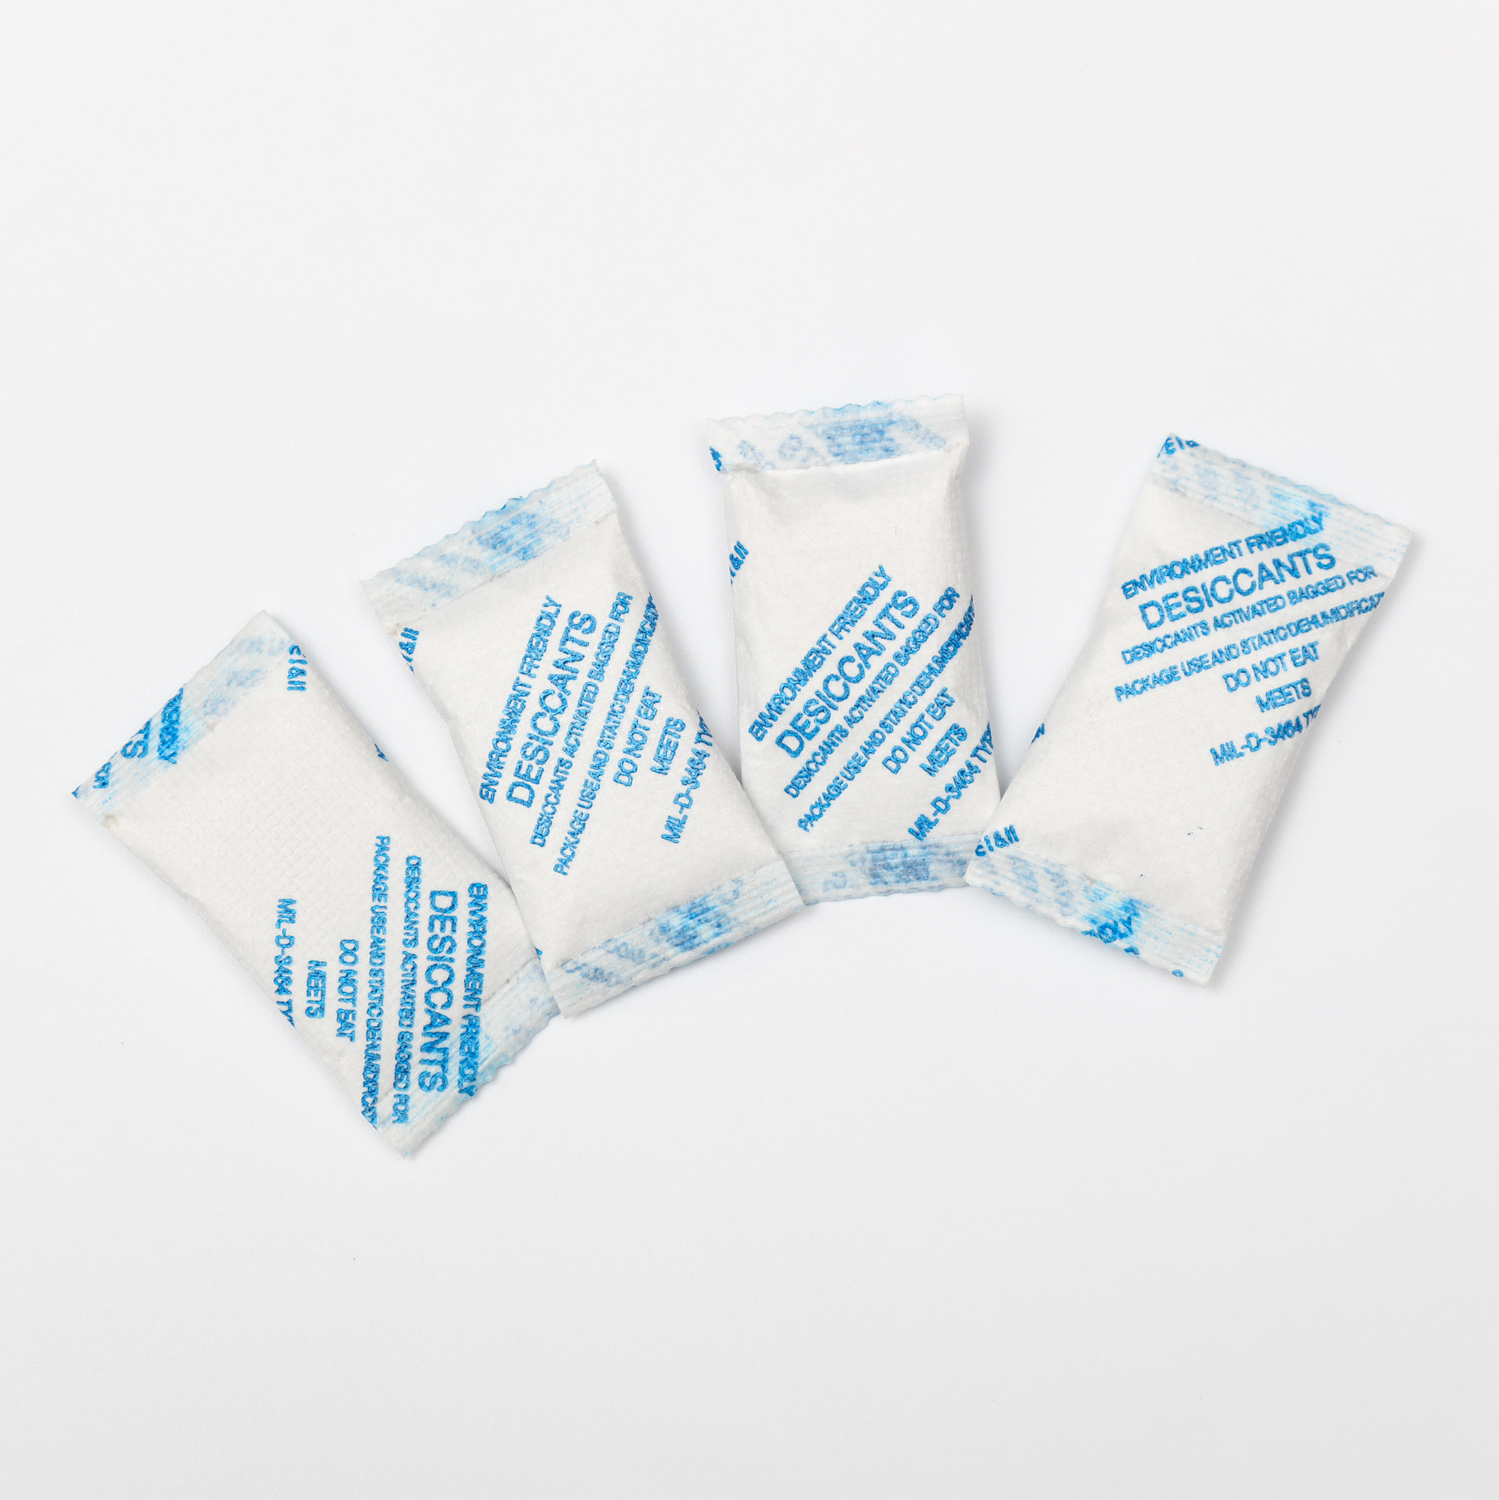 0.5g Pouch Chemical Stable Silica Gel Desiccant for Daily life